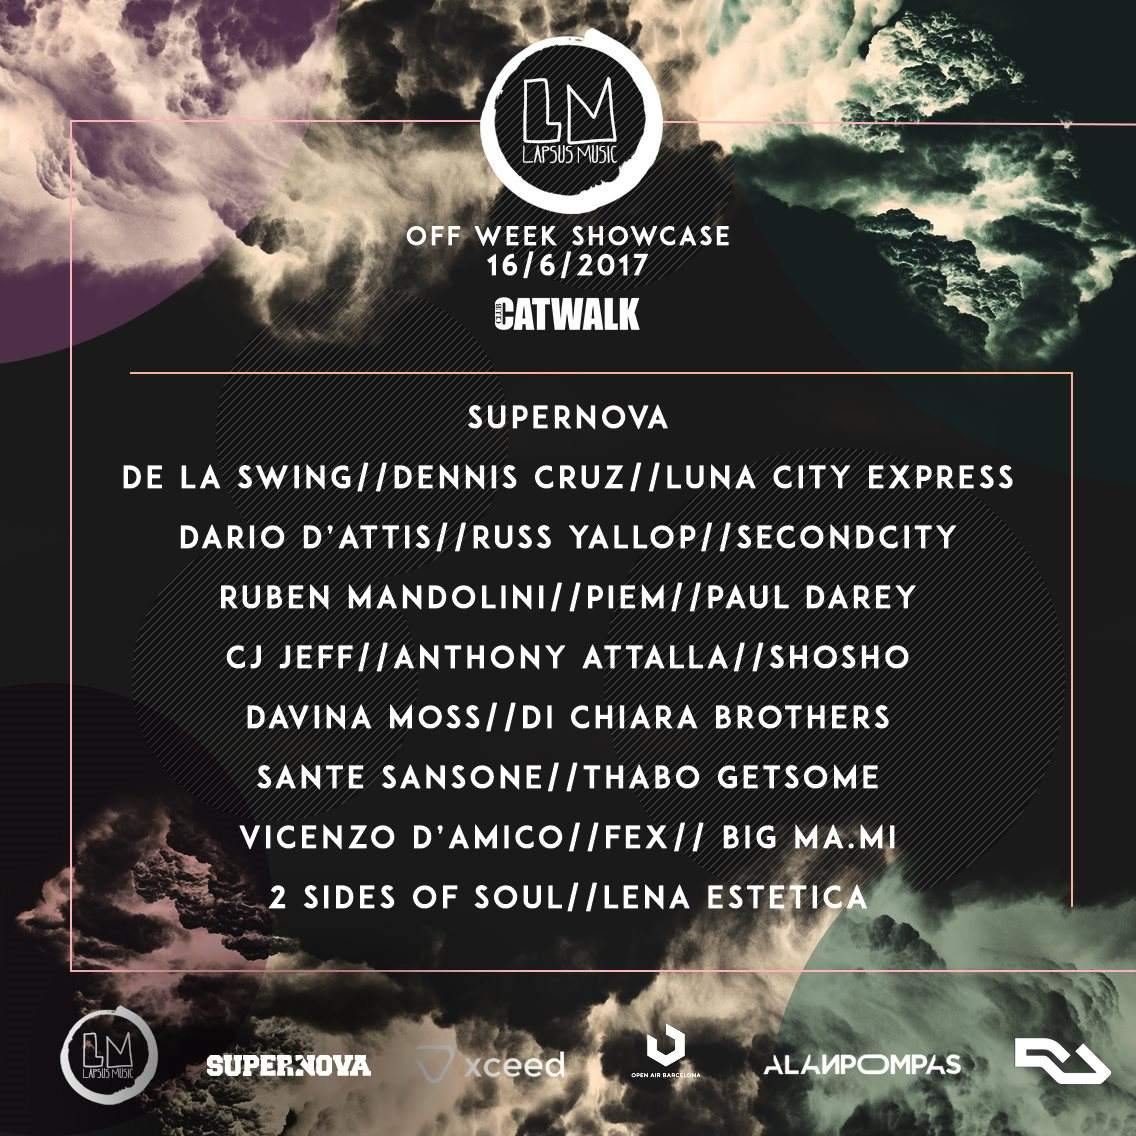 Open Air Barcelona - Lapsus Music Showcase *Off Week* - フライヤー表